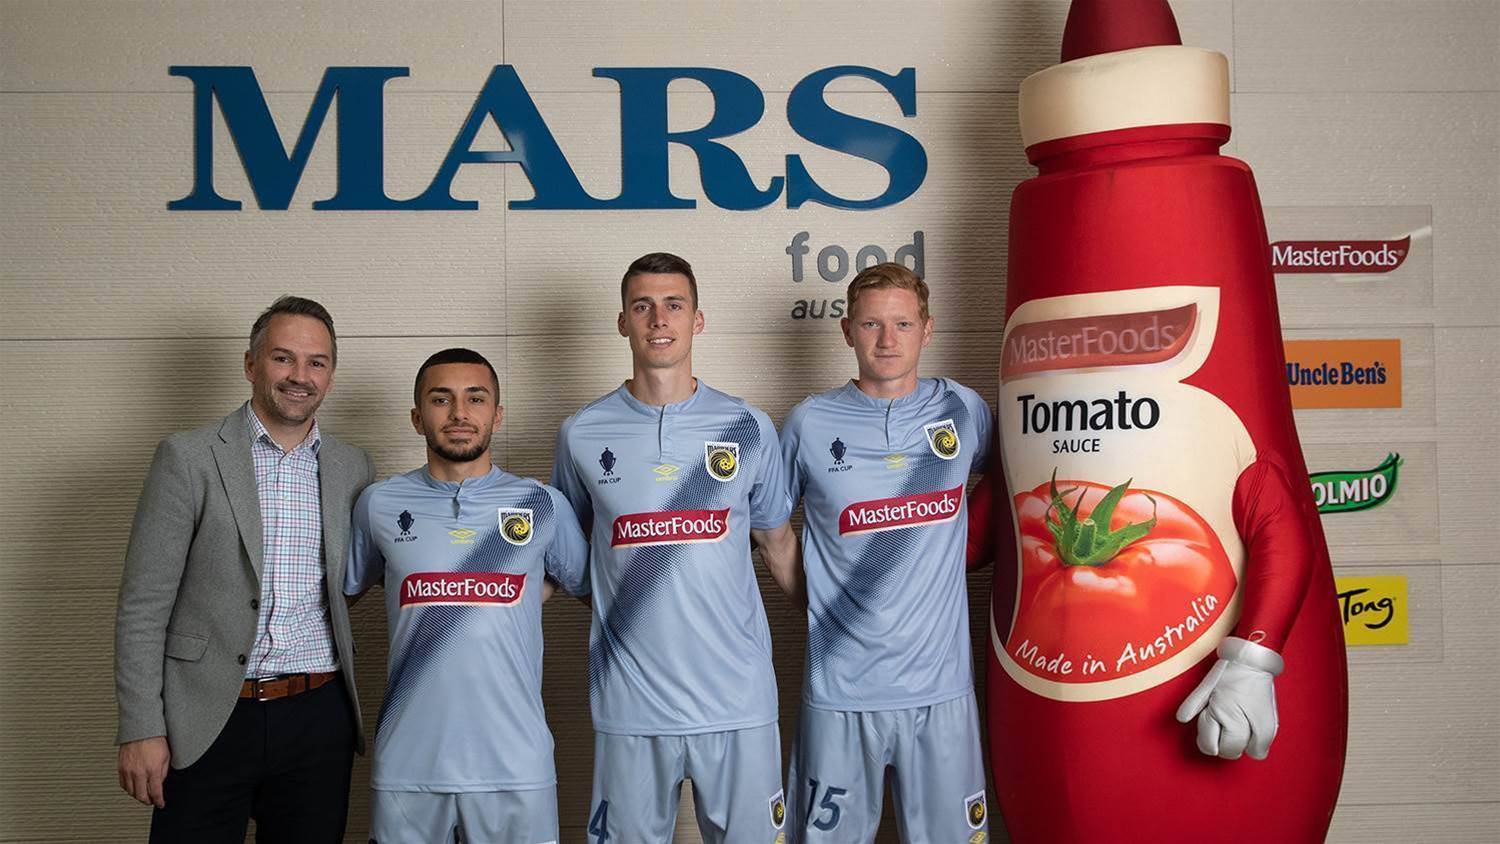 Mariners to wear iconic throwback kit for FFA Cup 2019 clash